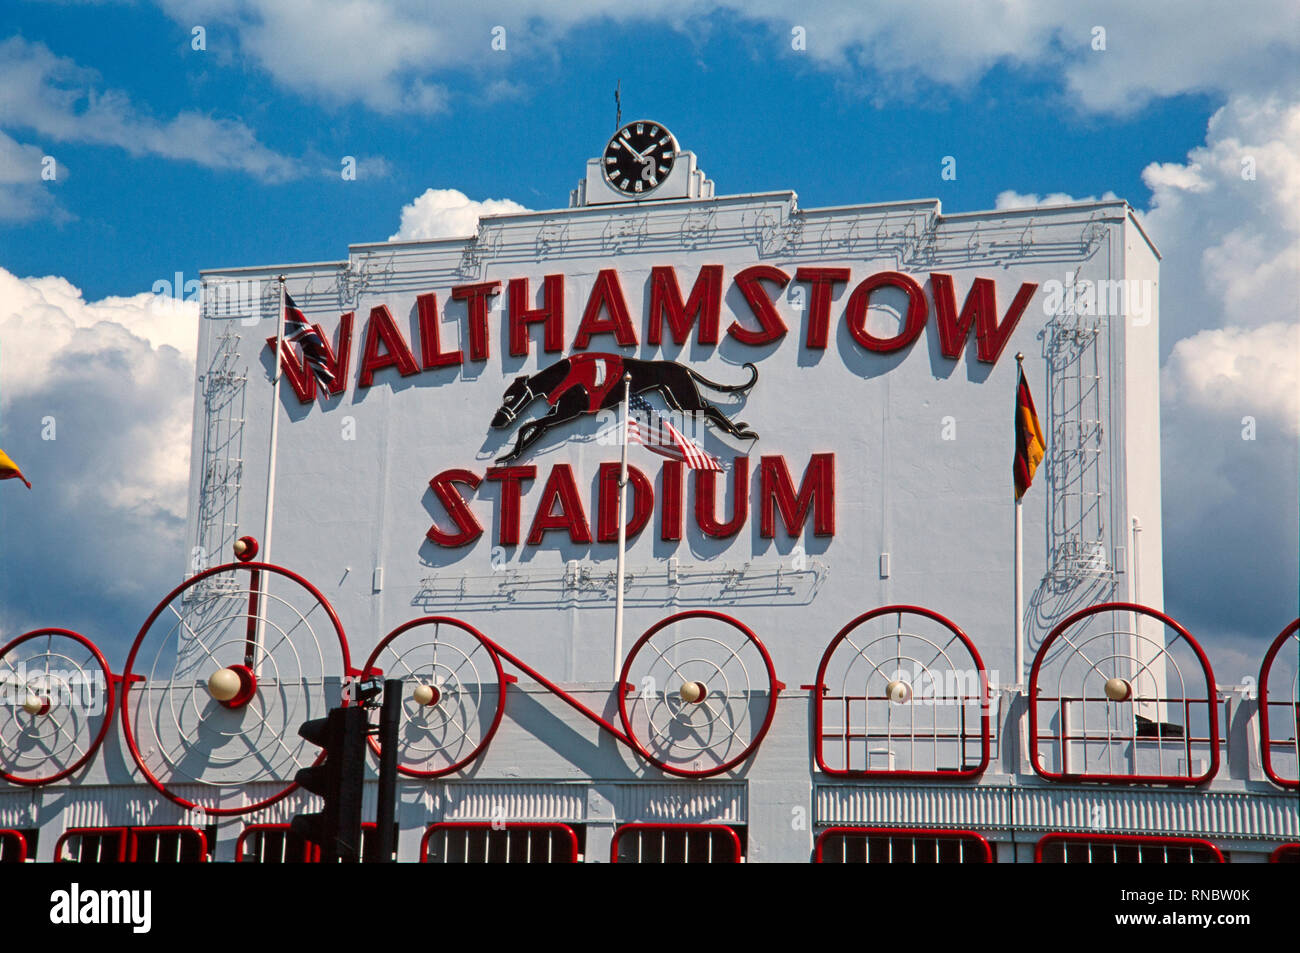 Walthamstow Stadium in London. Photograph taken in 2003. Walthamstow Stadium was a greyhound racing track located in the London Borough of Waltham Forest in east London. It was regarded as the leading greyhound racing stadium in Britain following the closure of White City in 1984. The stadium closed on 16 August 2008. Stock Photo